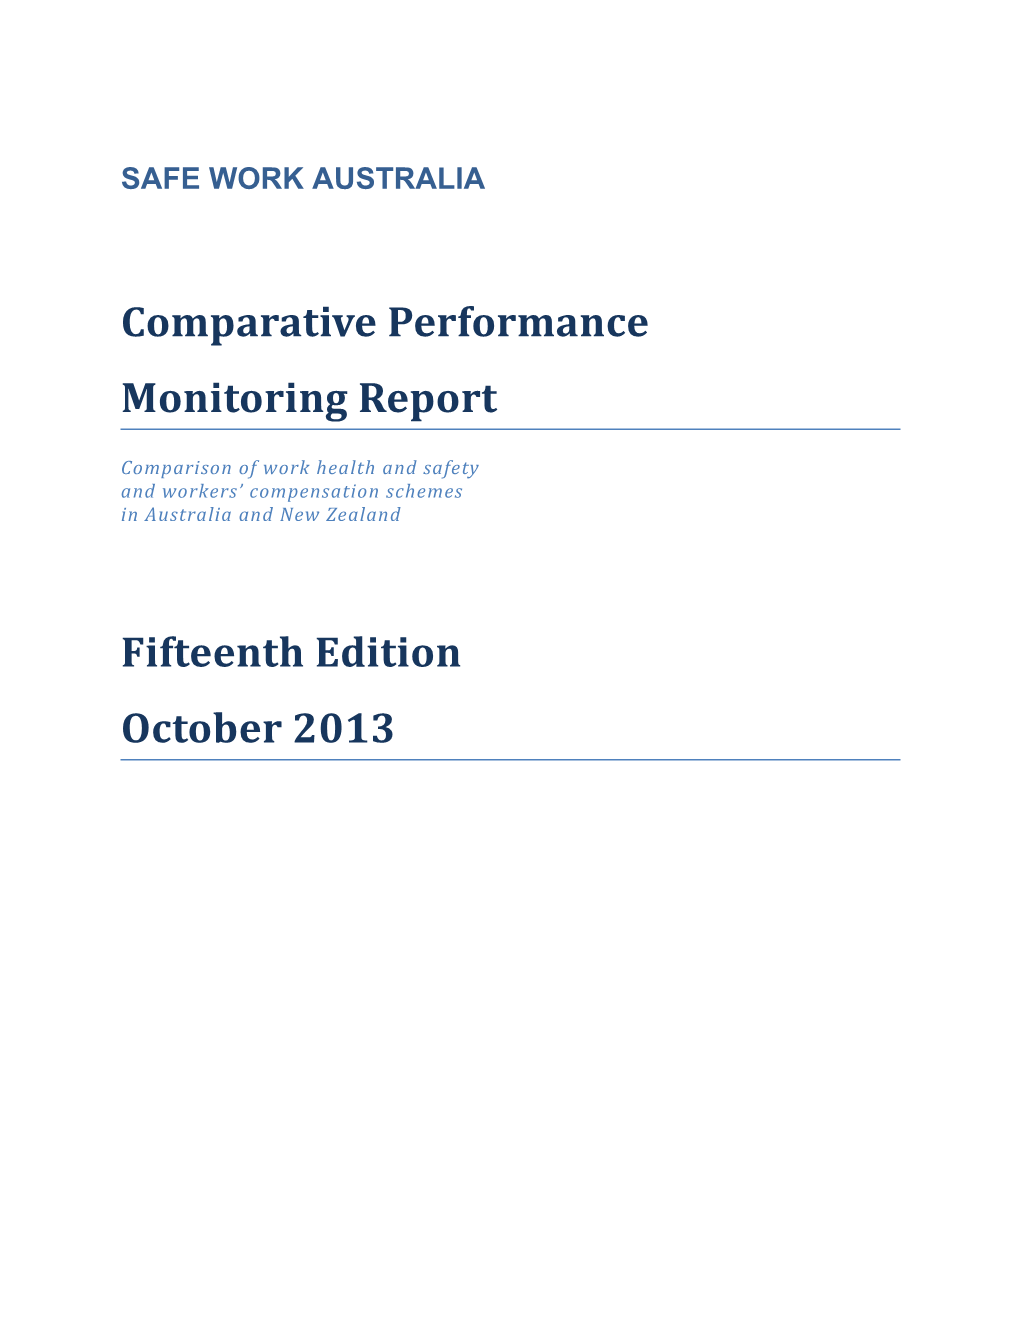 Comparative Performance Monitoring Report 15Th Edition